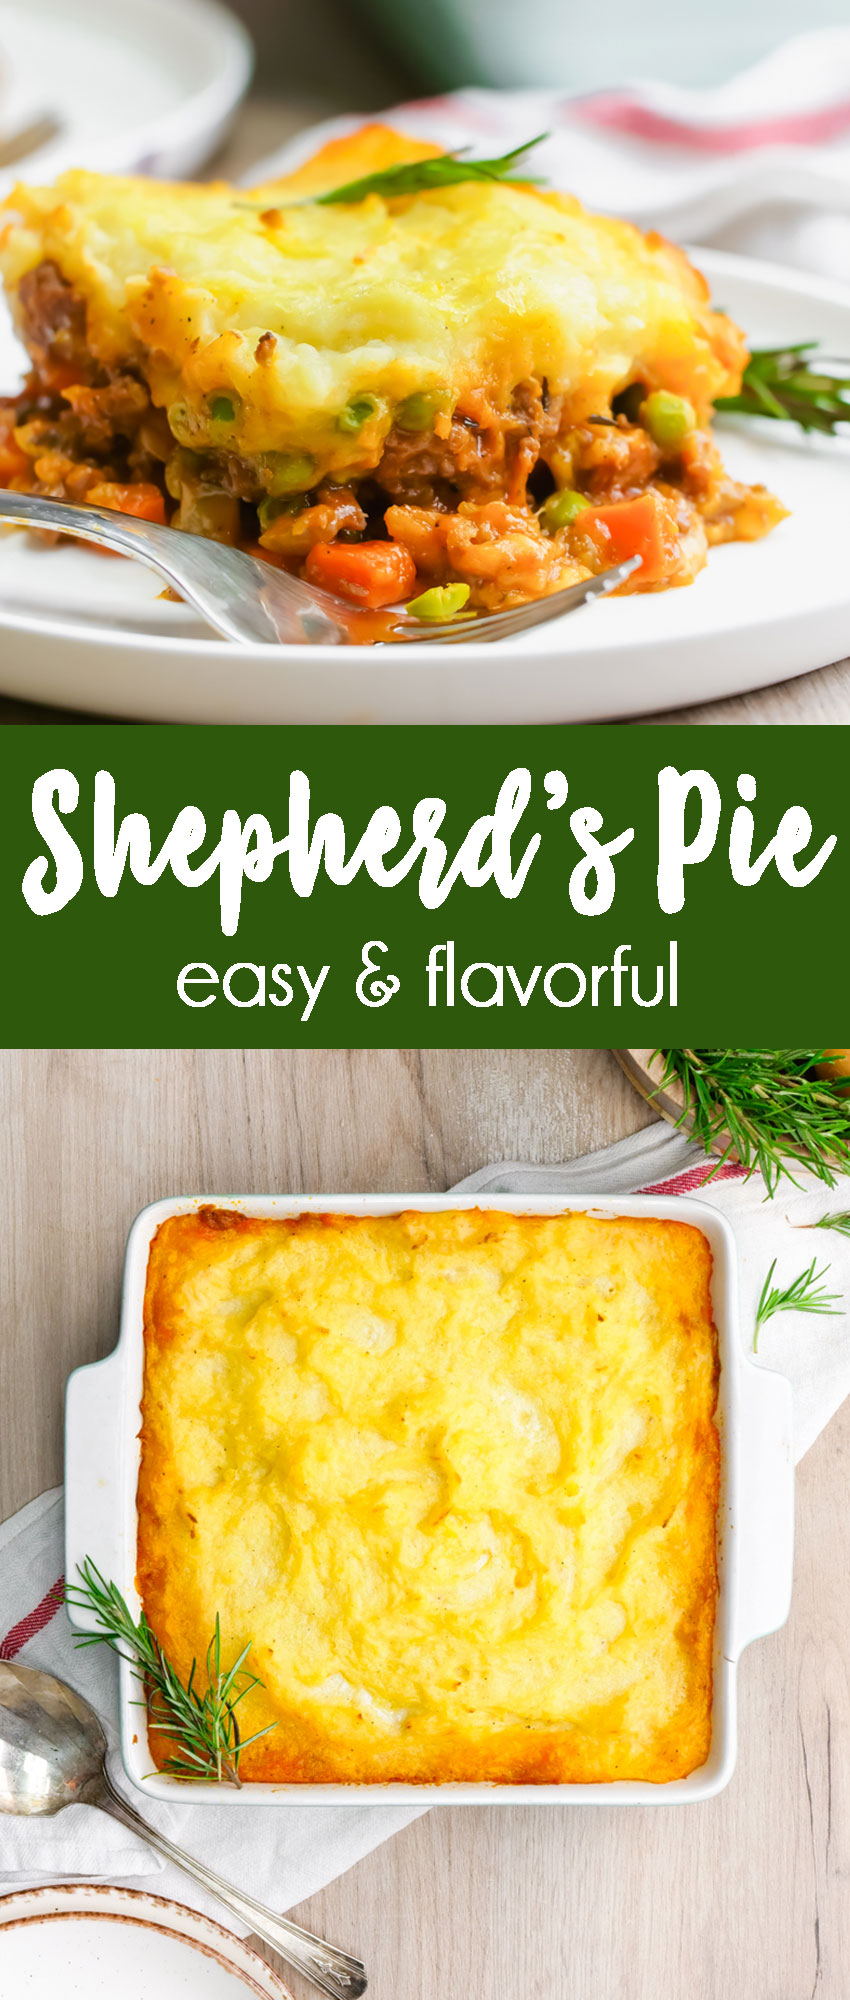 Shepherd's Pie, a meat pie with mashed potatoes